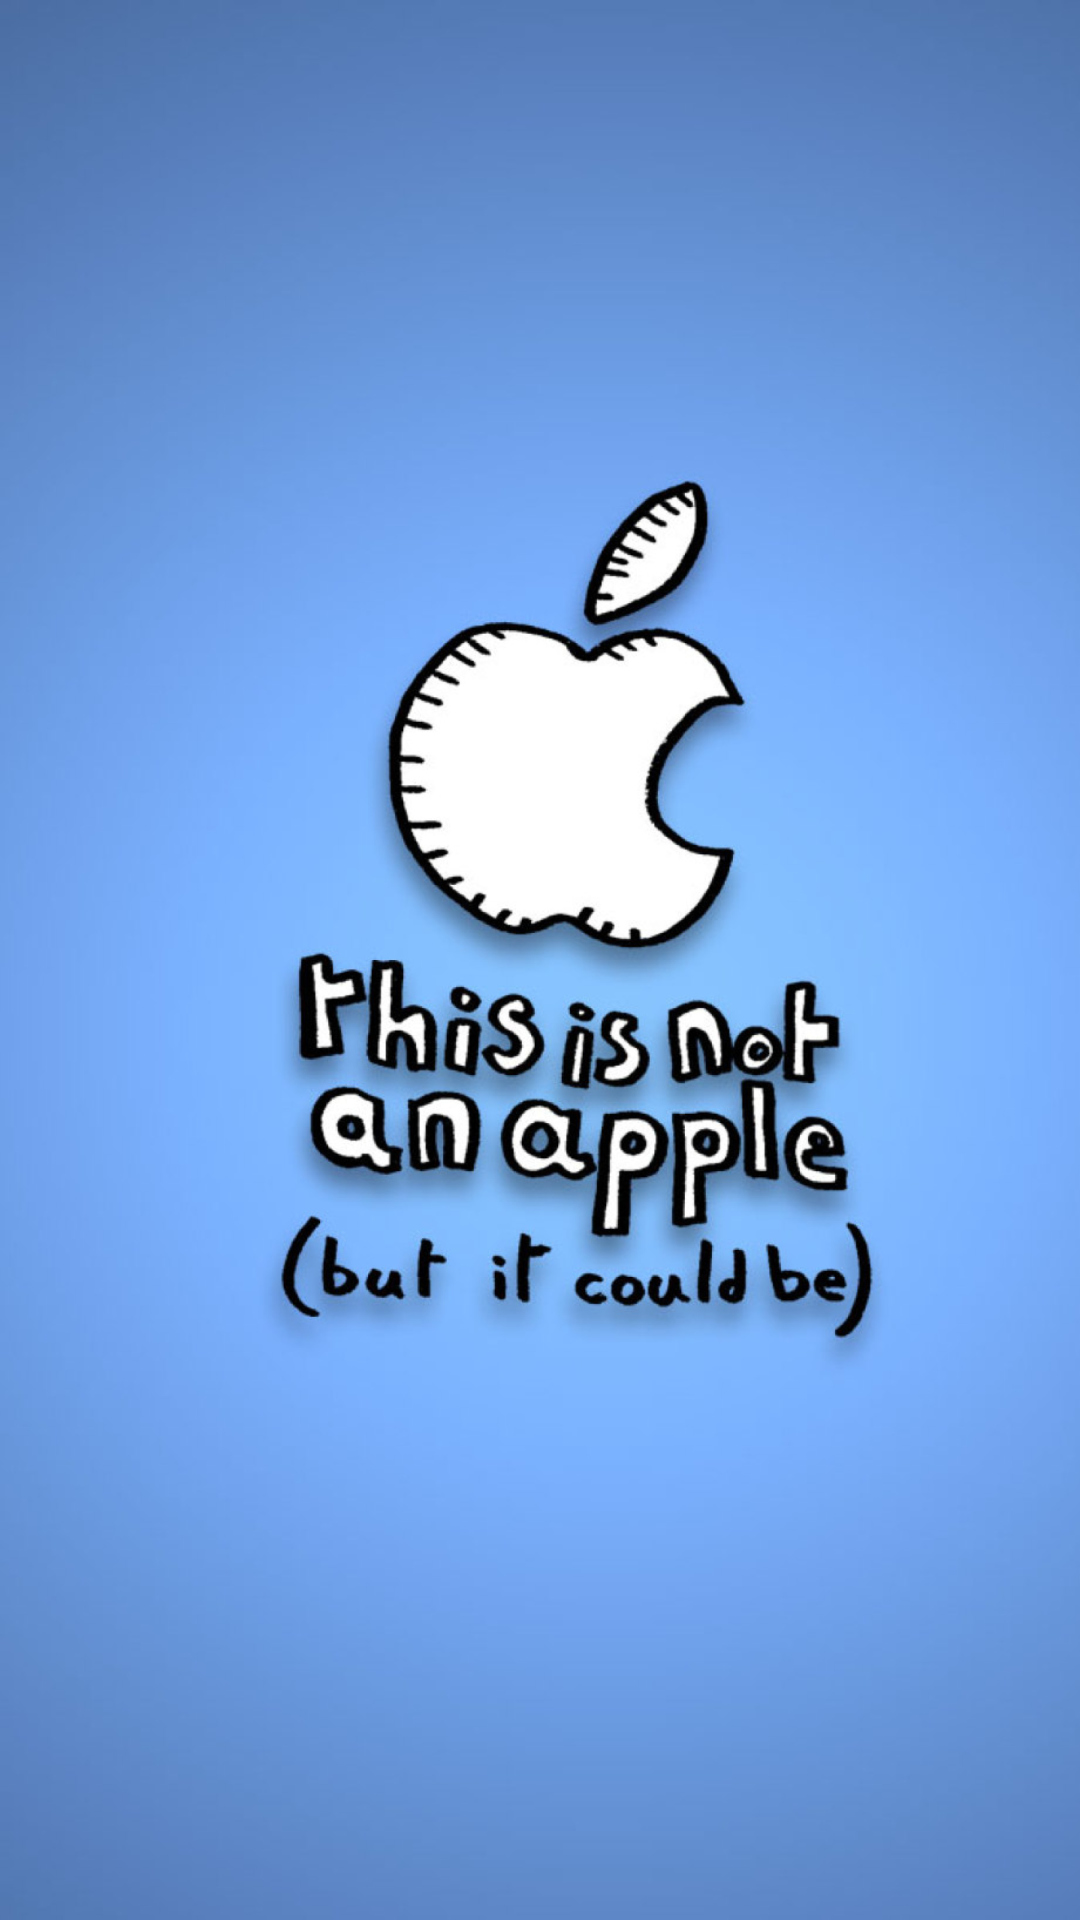 This Is Not An Apple wallpaper 1080x1920